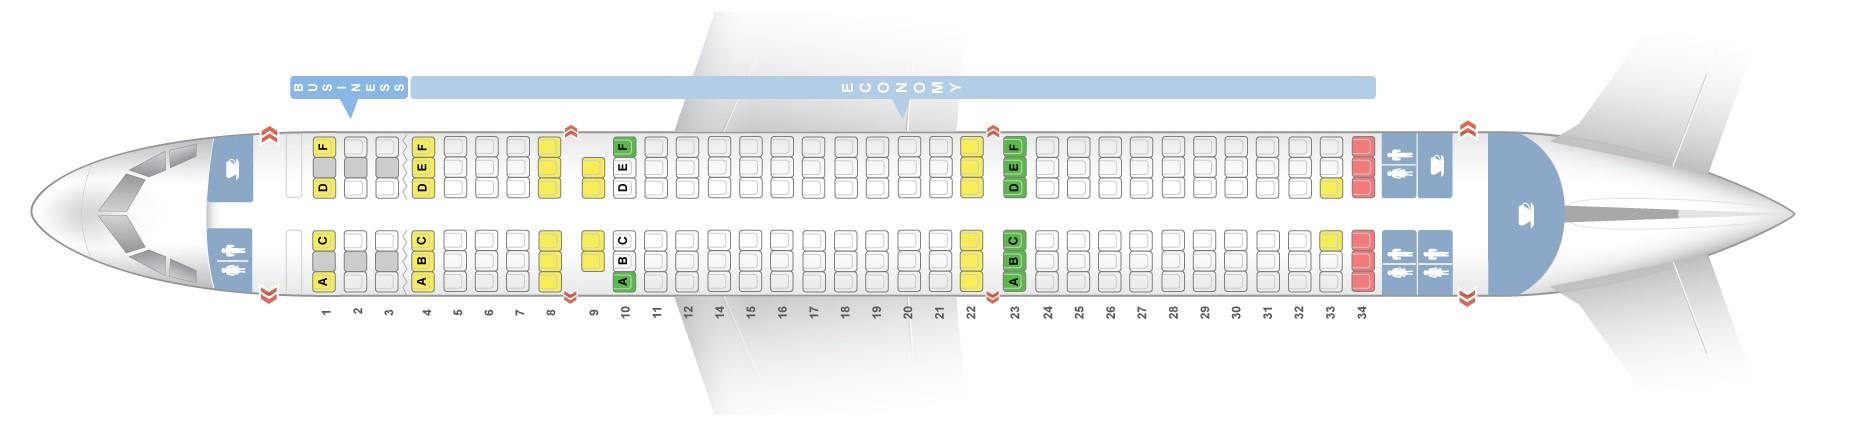 Seat map Airbus A321 Aegean Airlines. Best seats in the plane